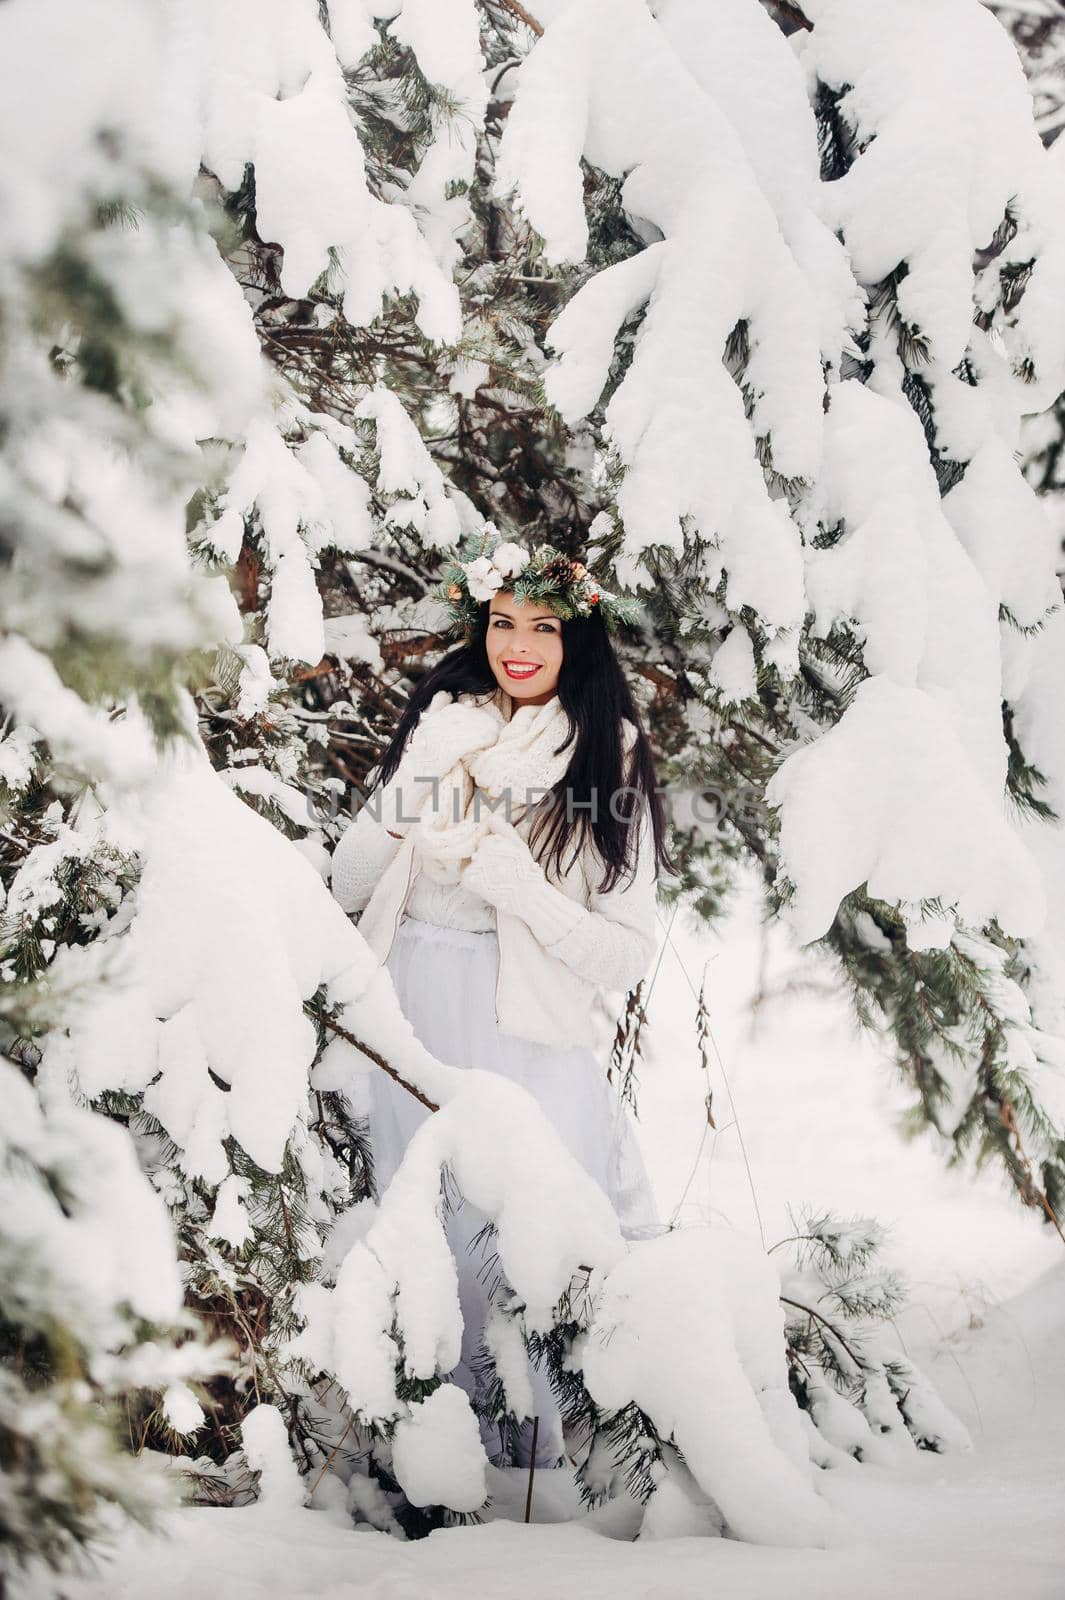 PPortrait of a woman in white clothes in a cold winter forest. Girl with a wreath on her head in a snow-covered winter forest.